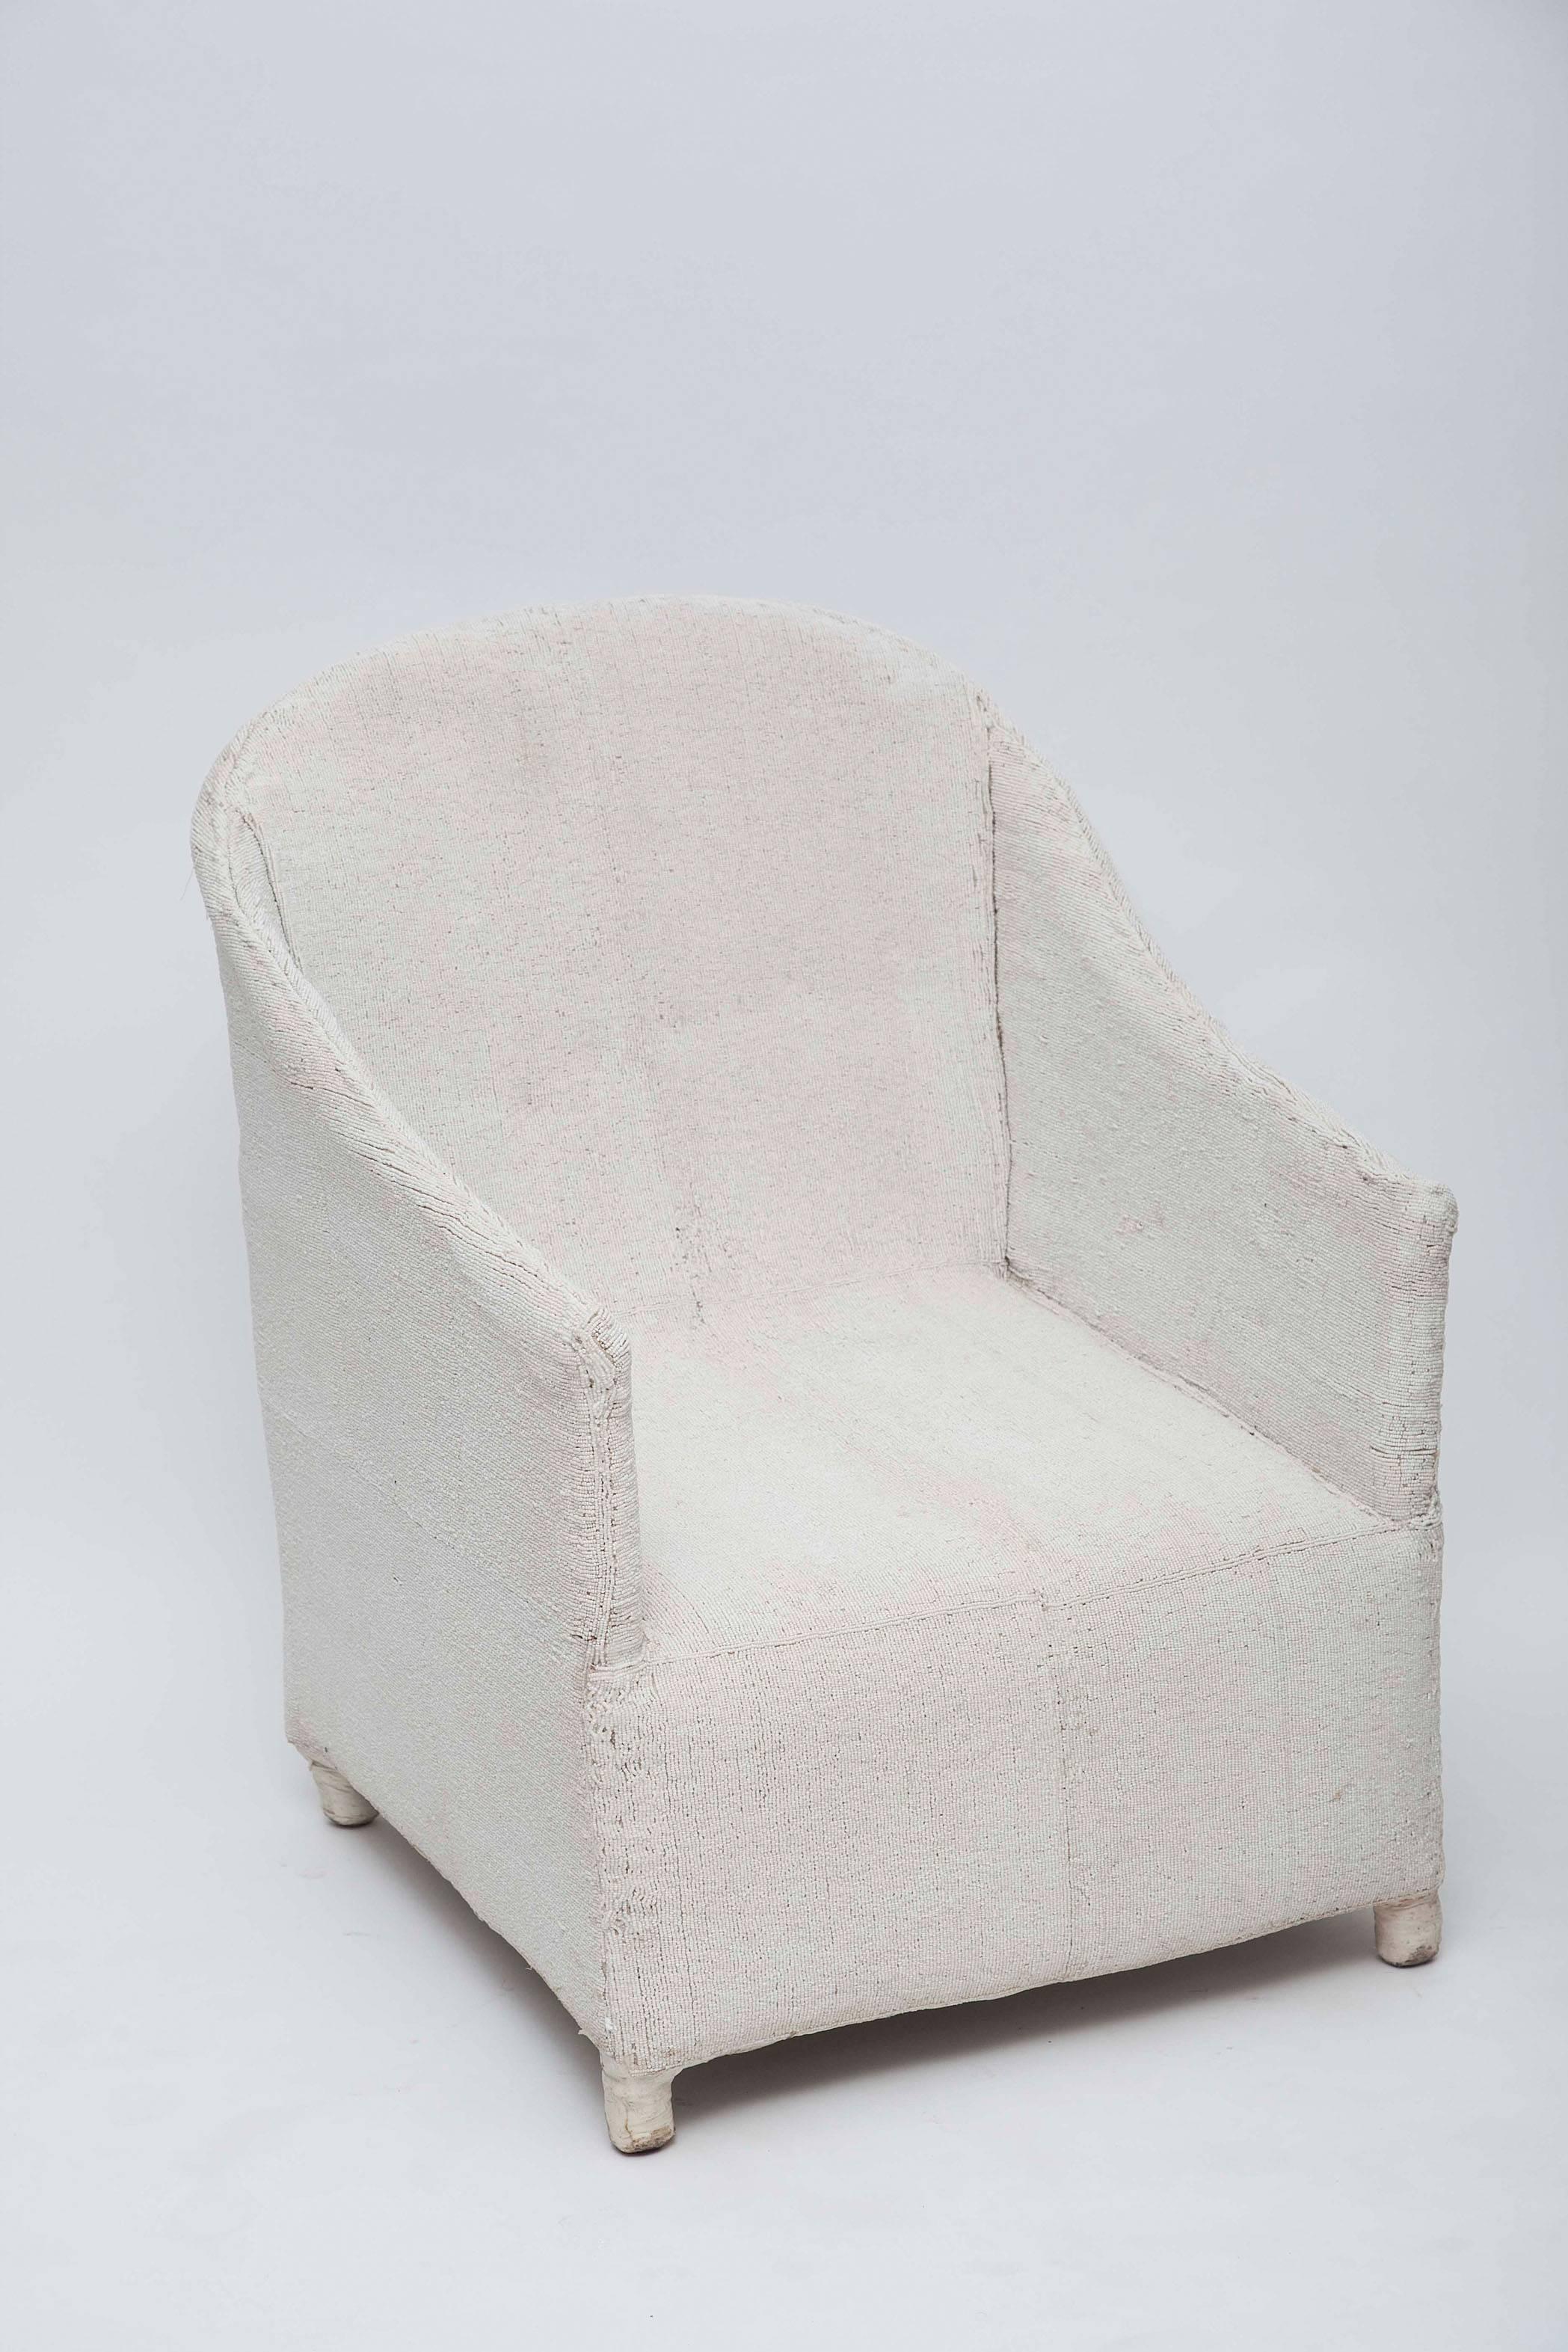 Meticulously assembled by hand in Nigeria using tiny white glass beads over a canvas and wood frame. Each chair is one-of-a-kind and exceptionally unique (and comfortable too)!